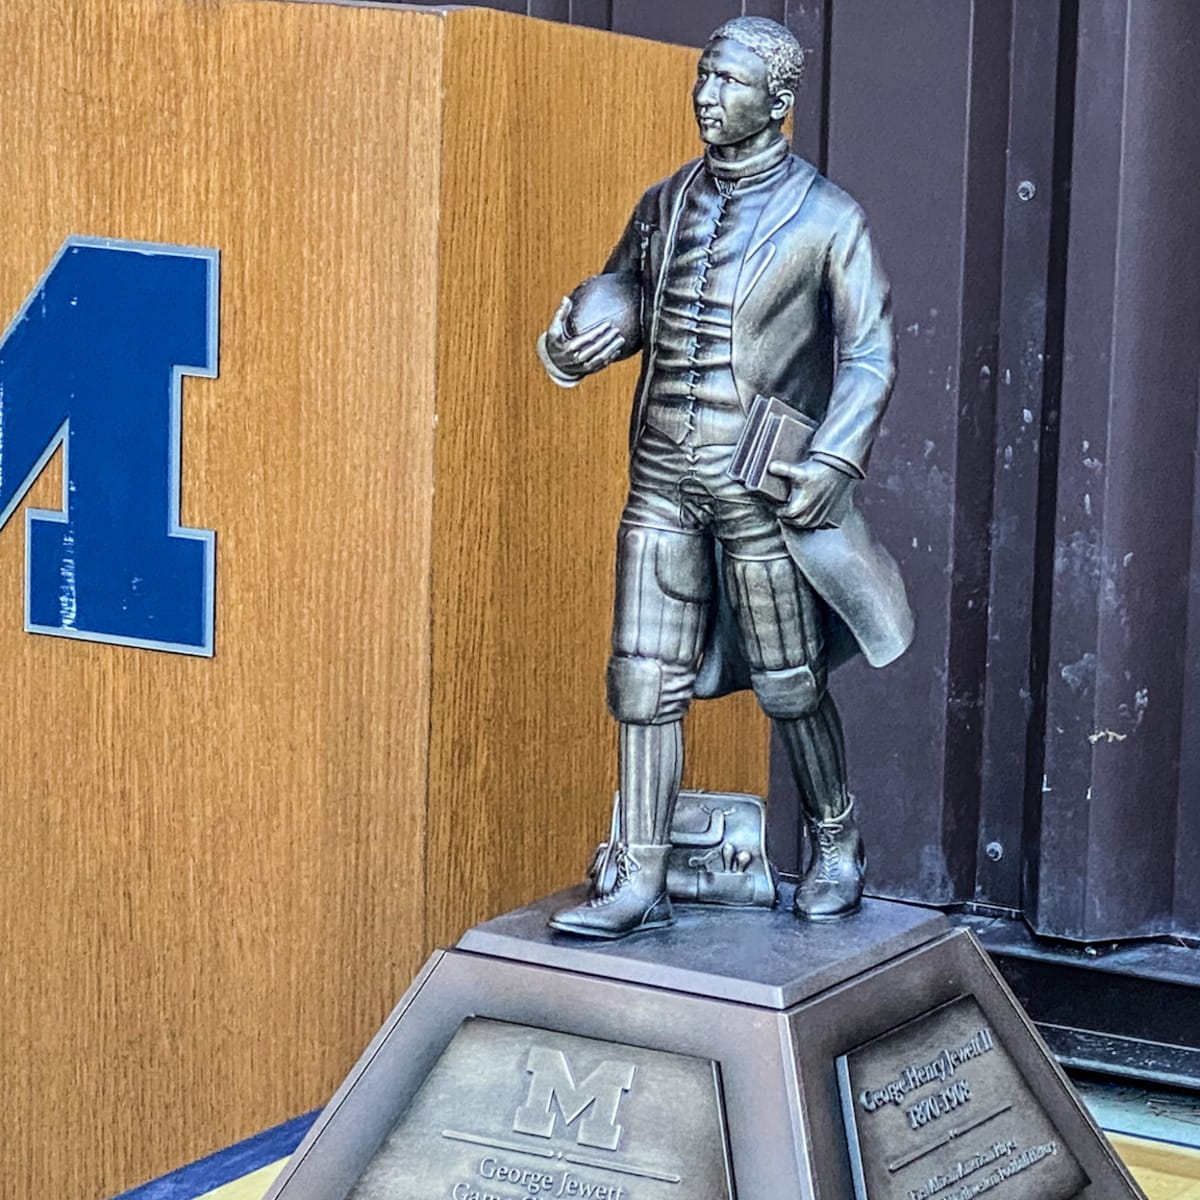 Everything About The George Jewett Trophy, Michigan/Northwestern Game Is  Special - Sports Illustrated Michigan Wolverines News, Analysis and More